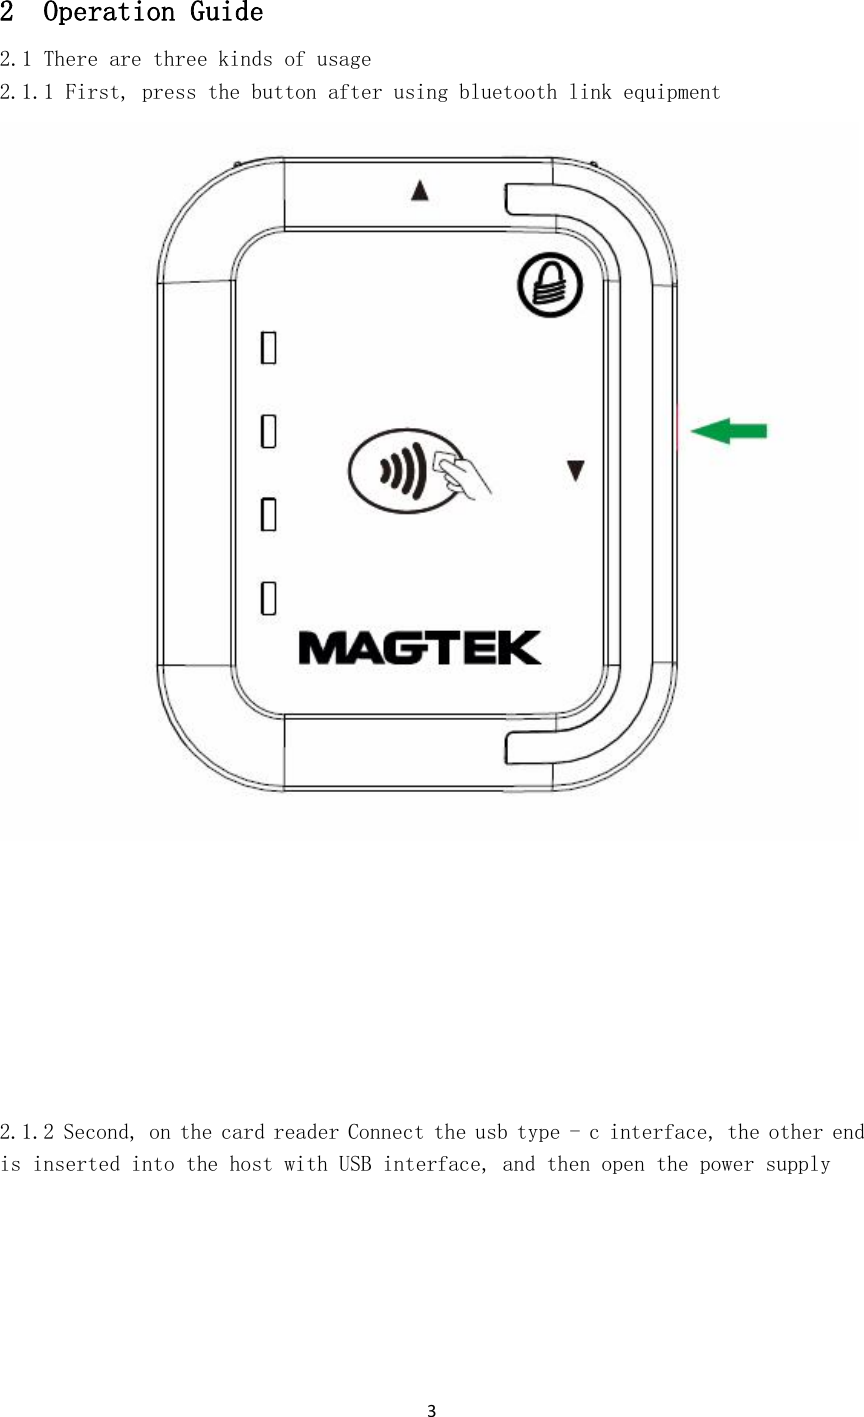  3   2  Operation Guide 2.1 There are three kinds of usage 2.1.1 First, press the button after using bluetooth link equipment          2.1.2 Second, on the card reader Connect the usb type - c interface, the other end is inserted into the host with USB interface, and then open the power supply 